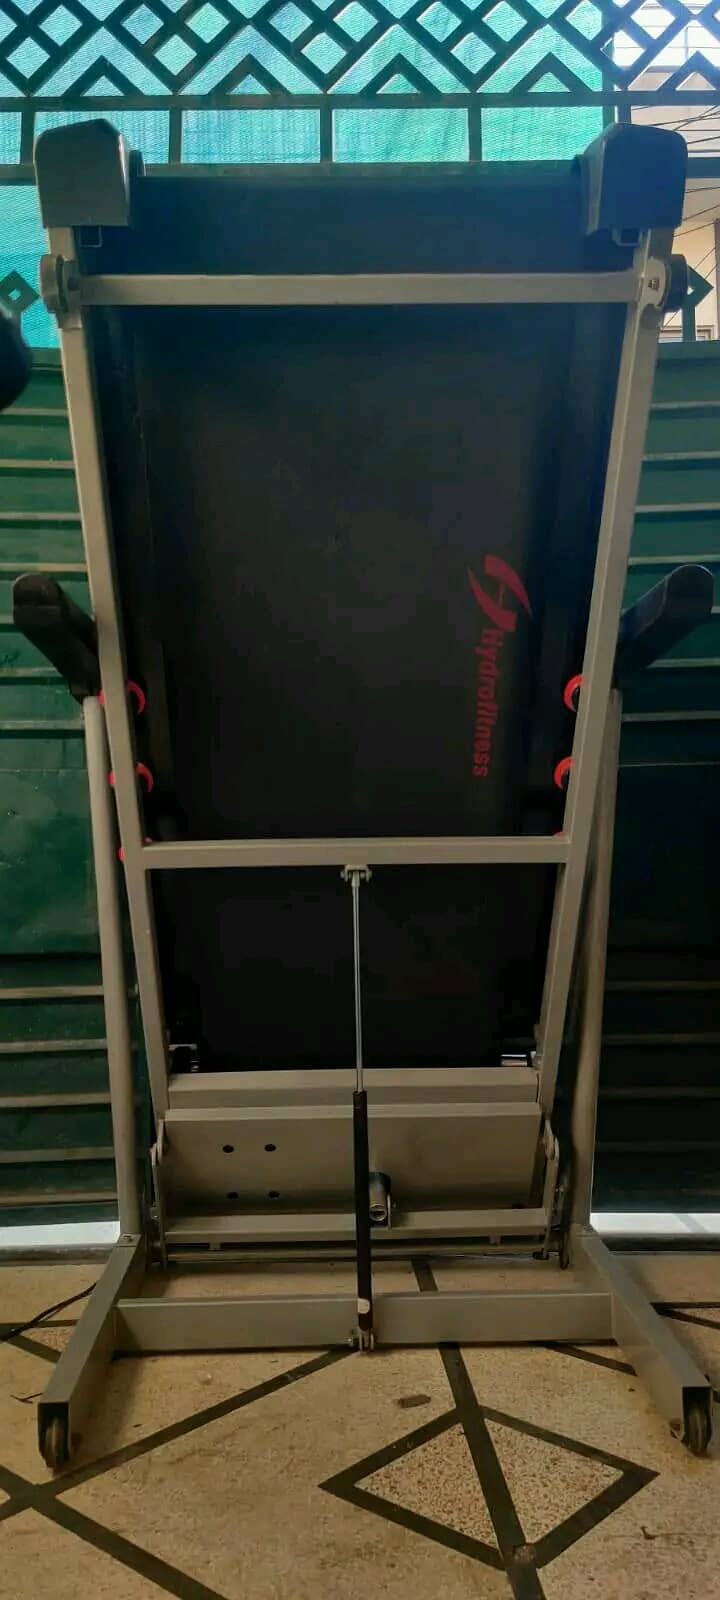 Hydro fitness electrical treadmill 0316/1736/128 whasapp 9